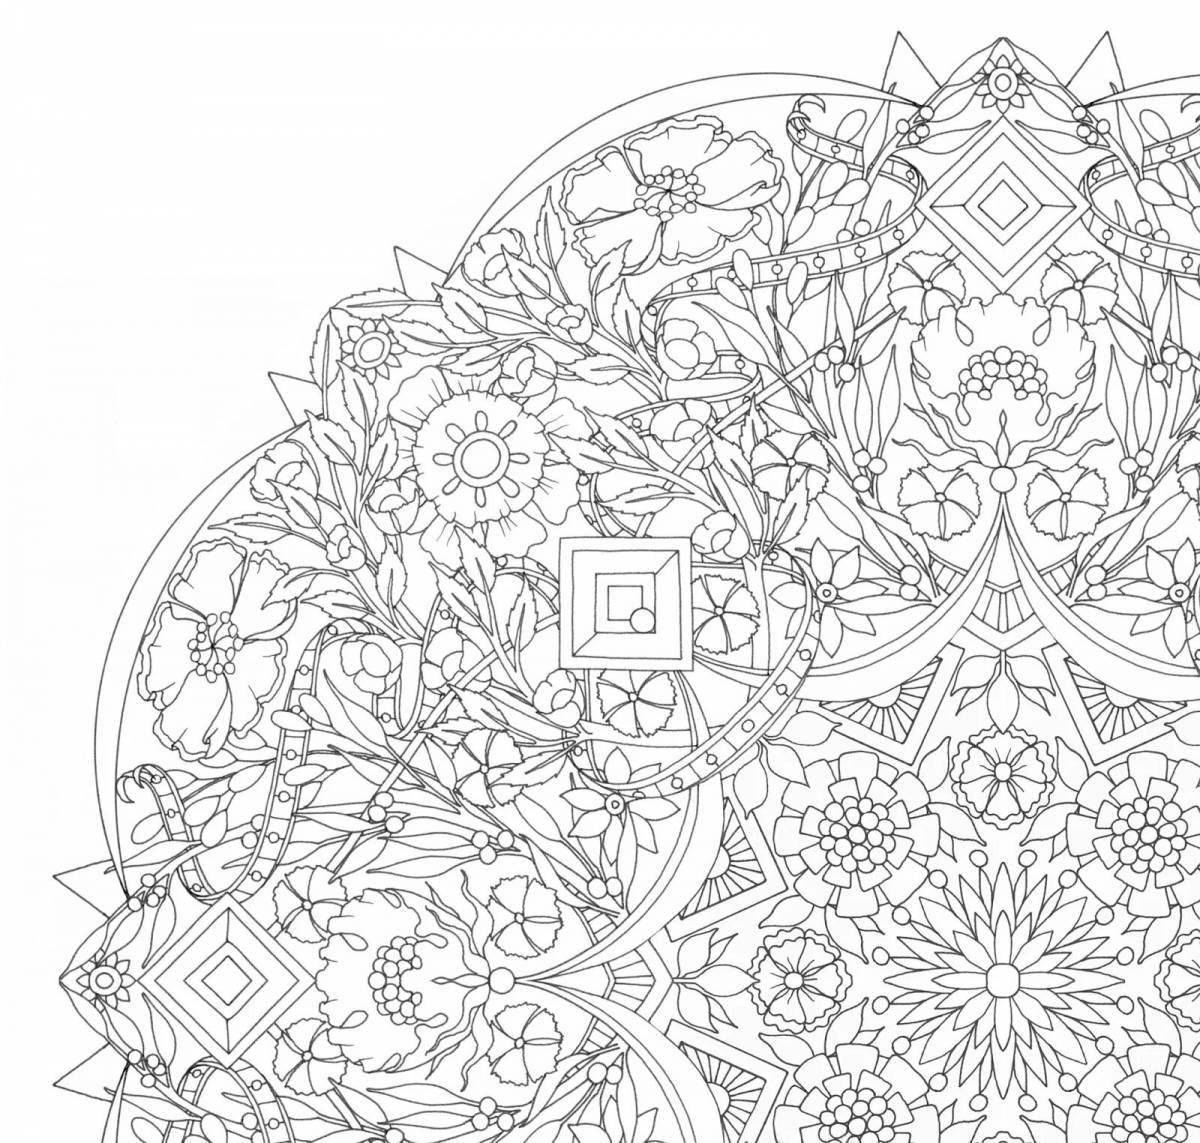 Bold coloring page elements